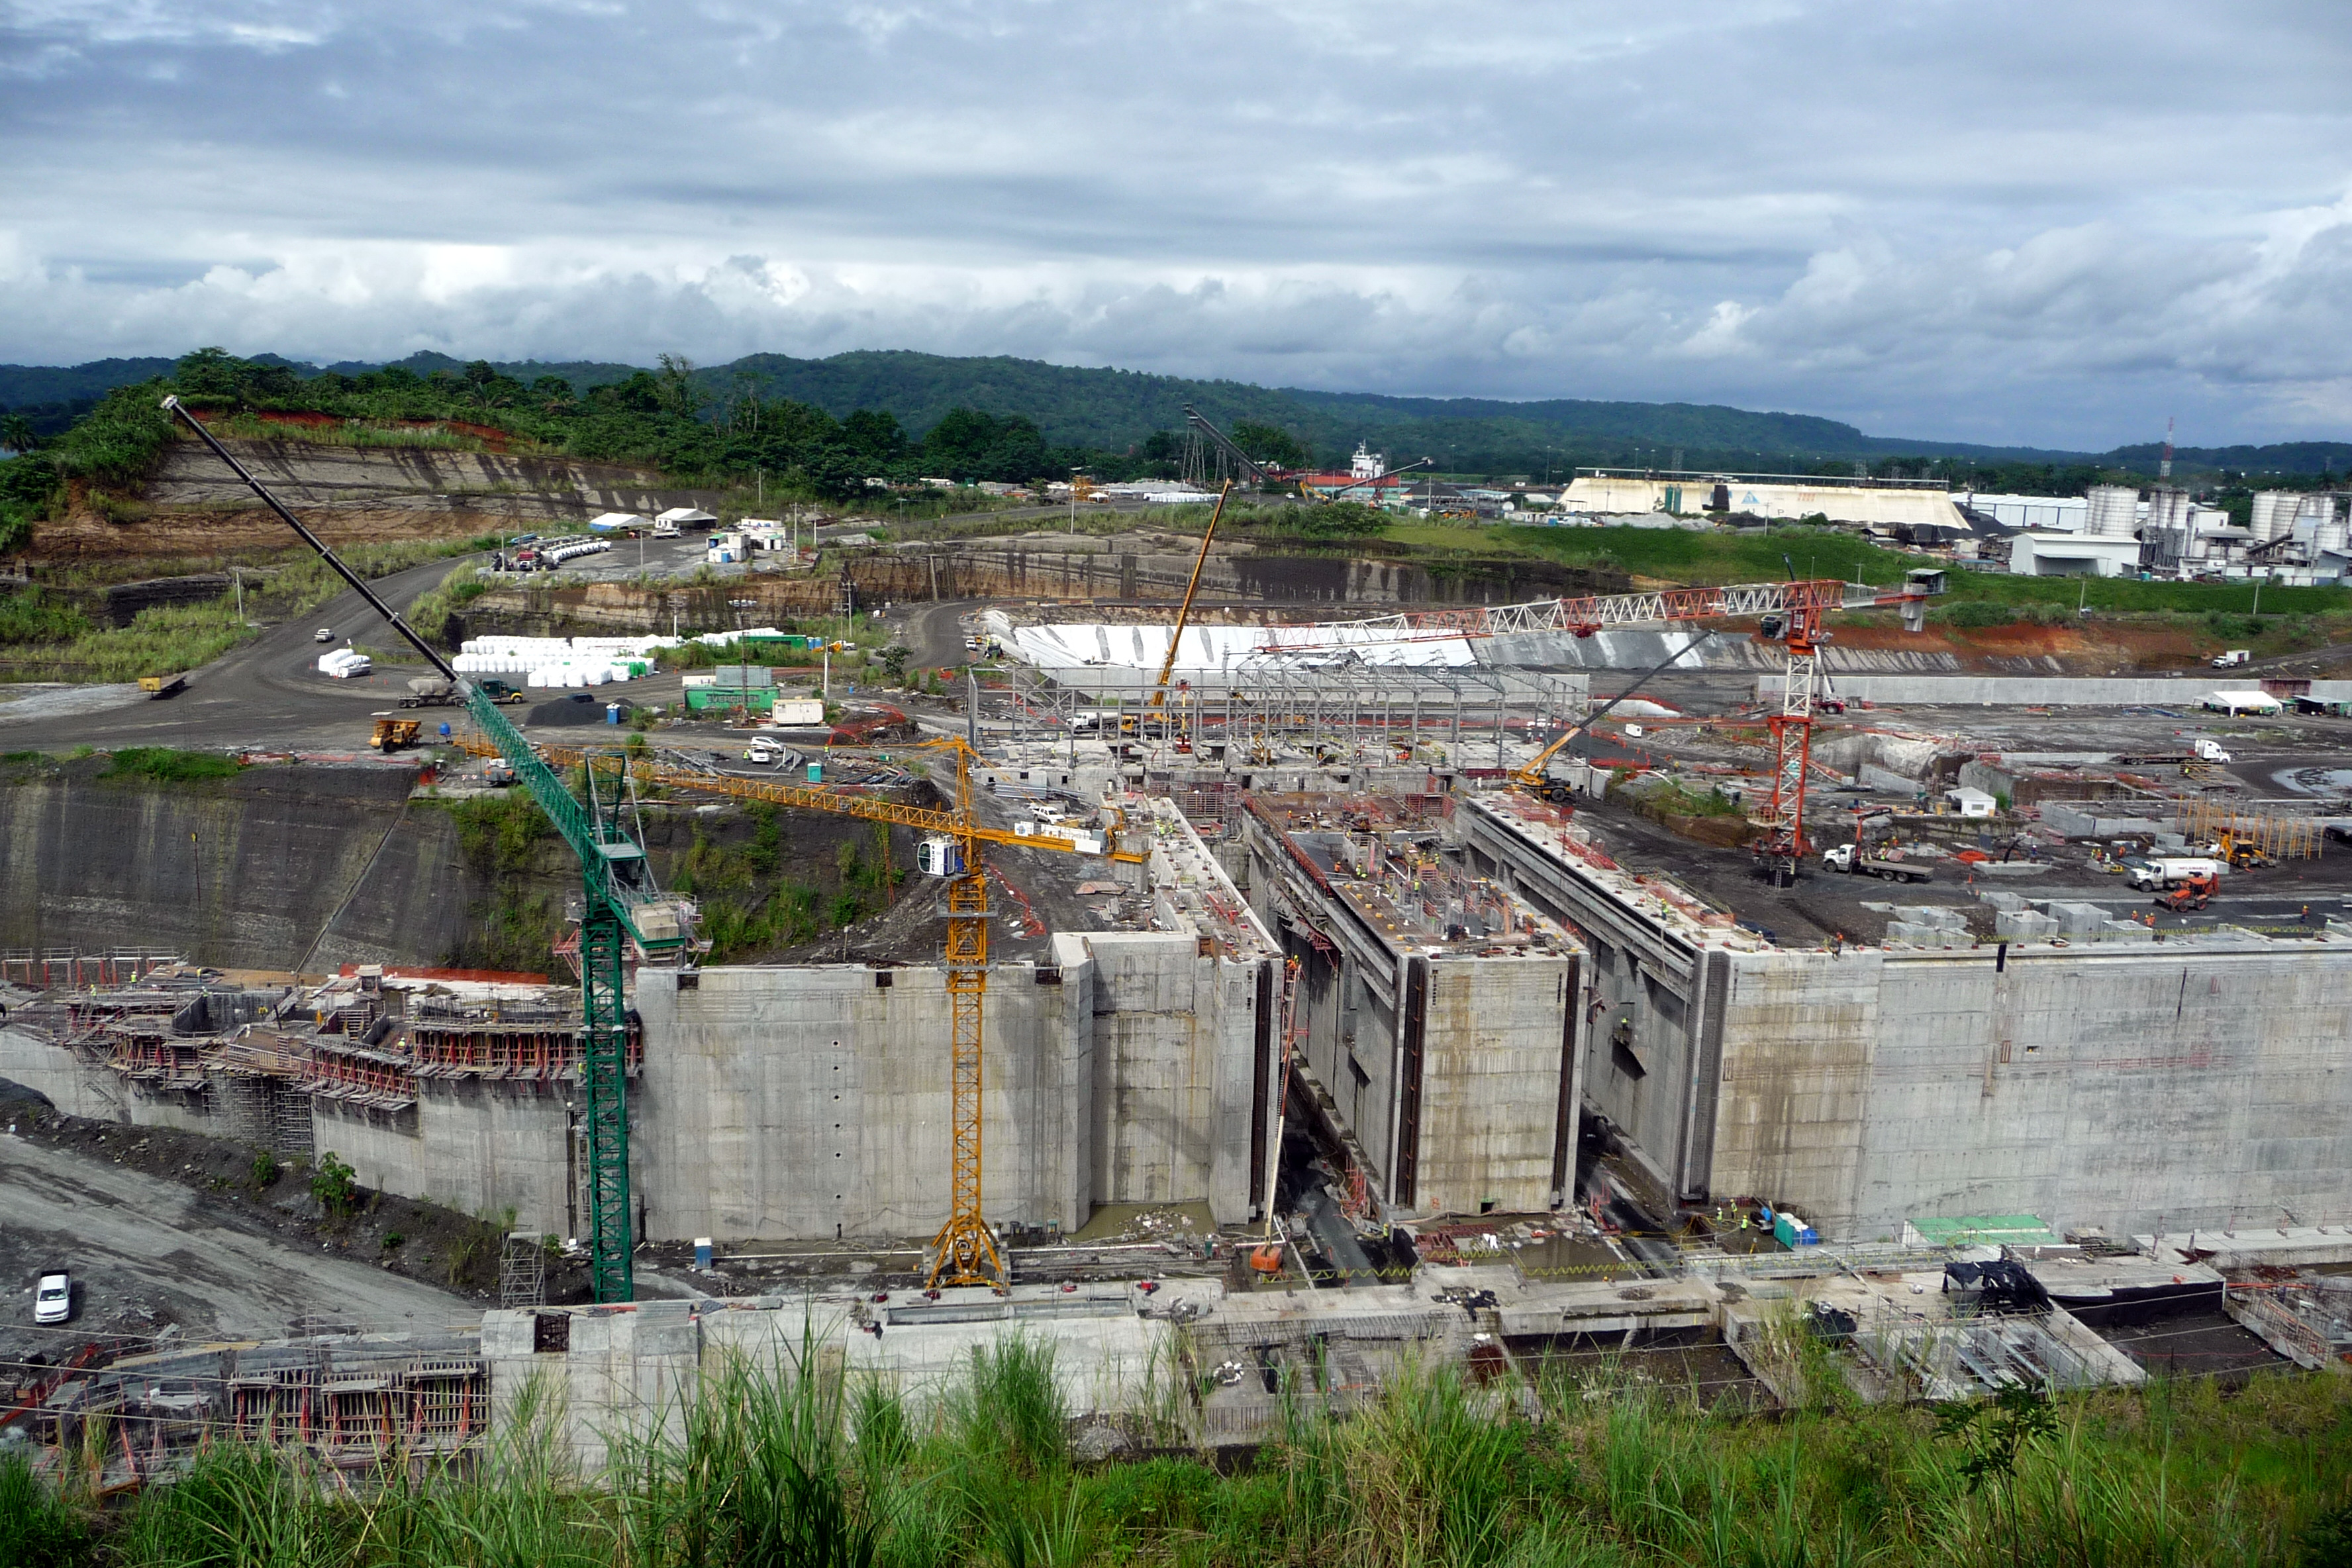 Construction in progress at the Panama Canal